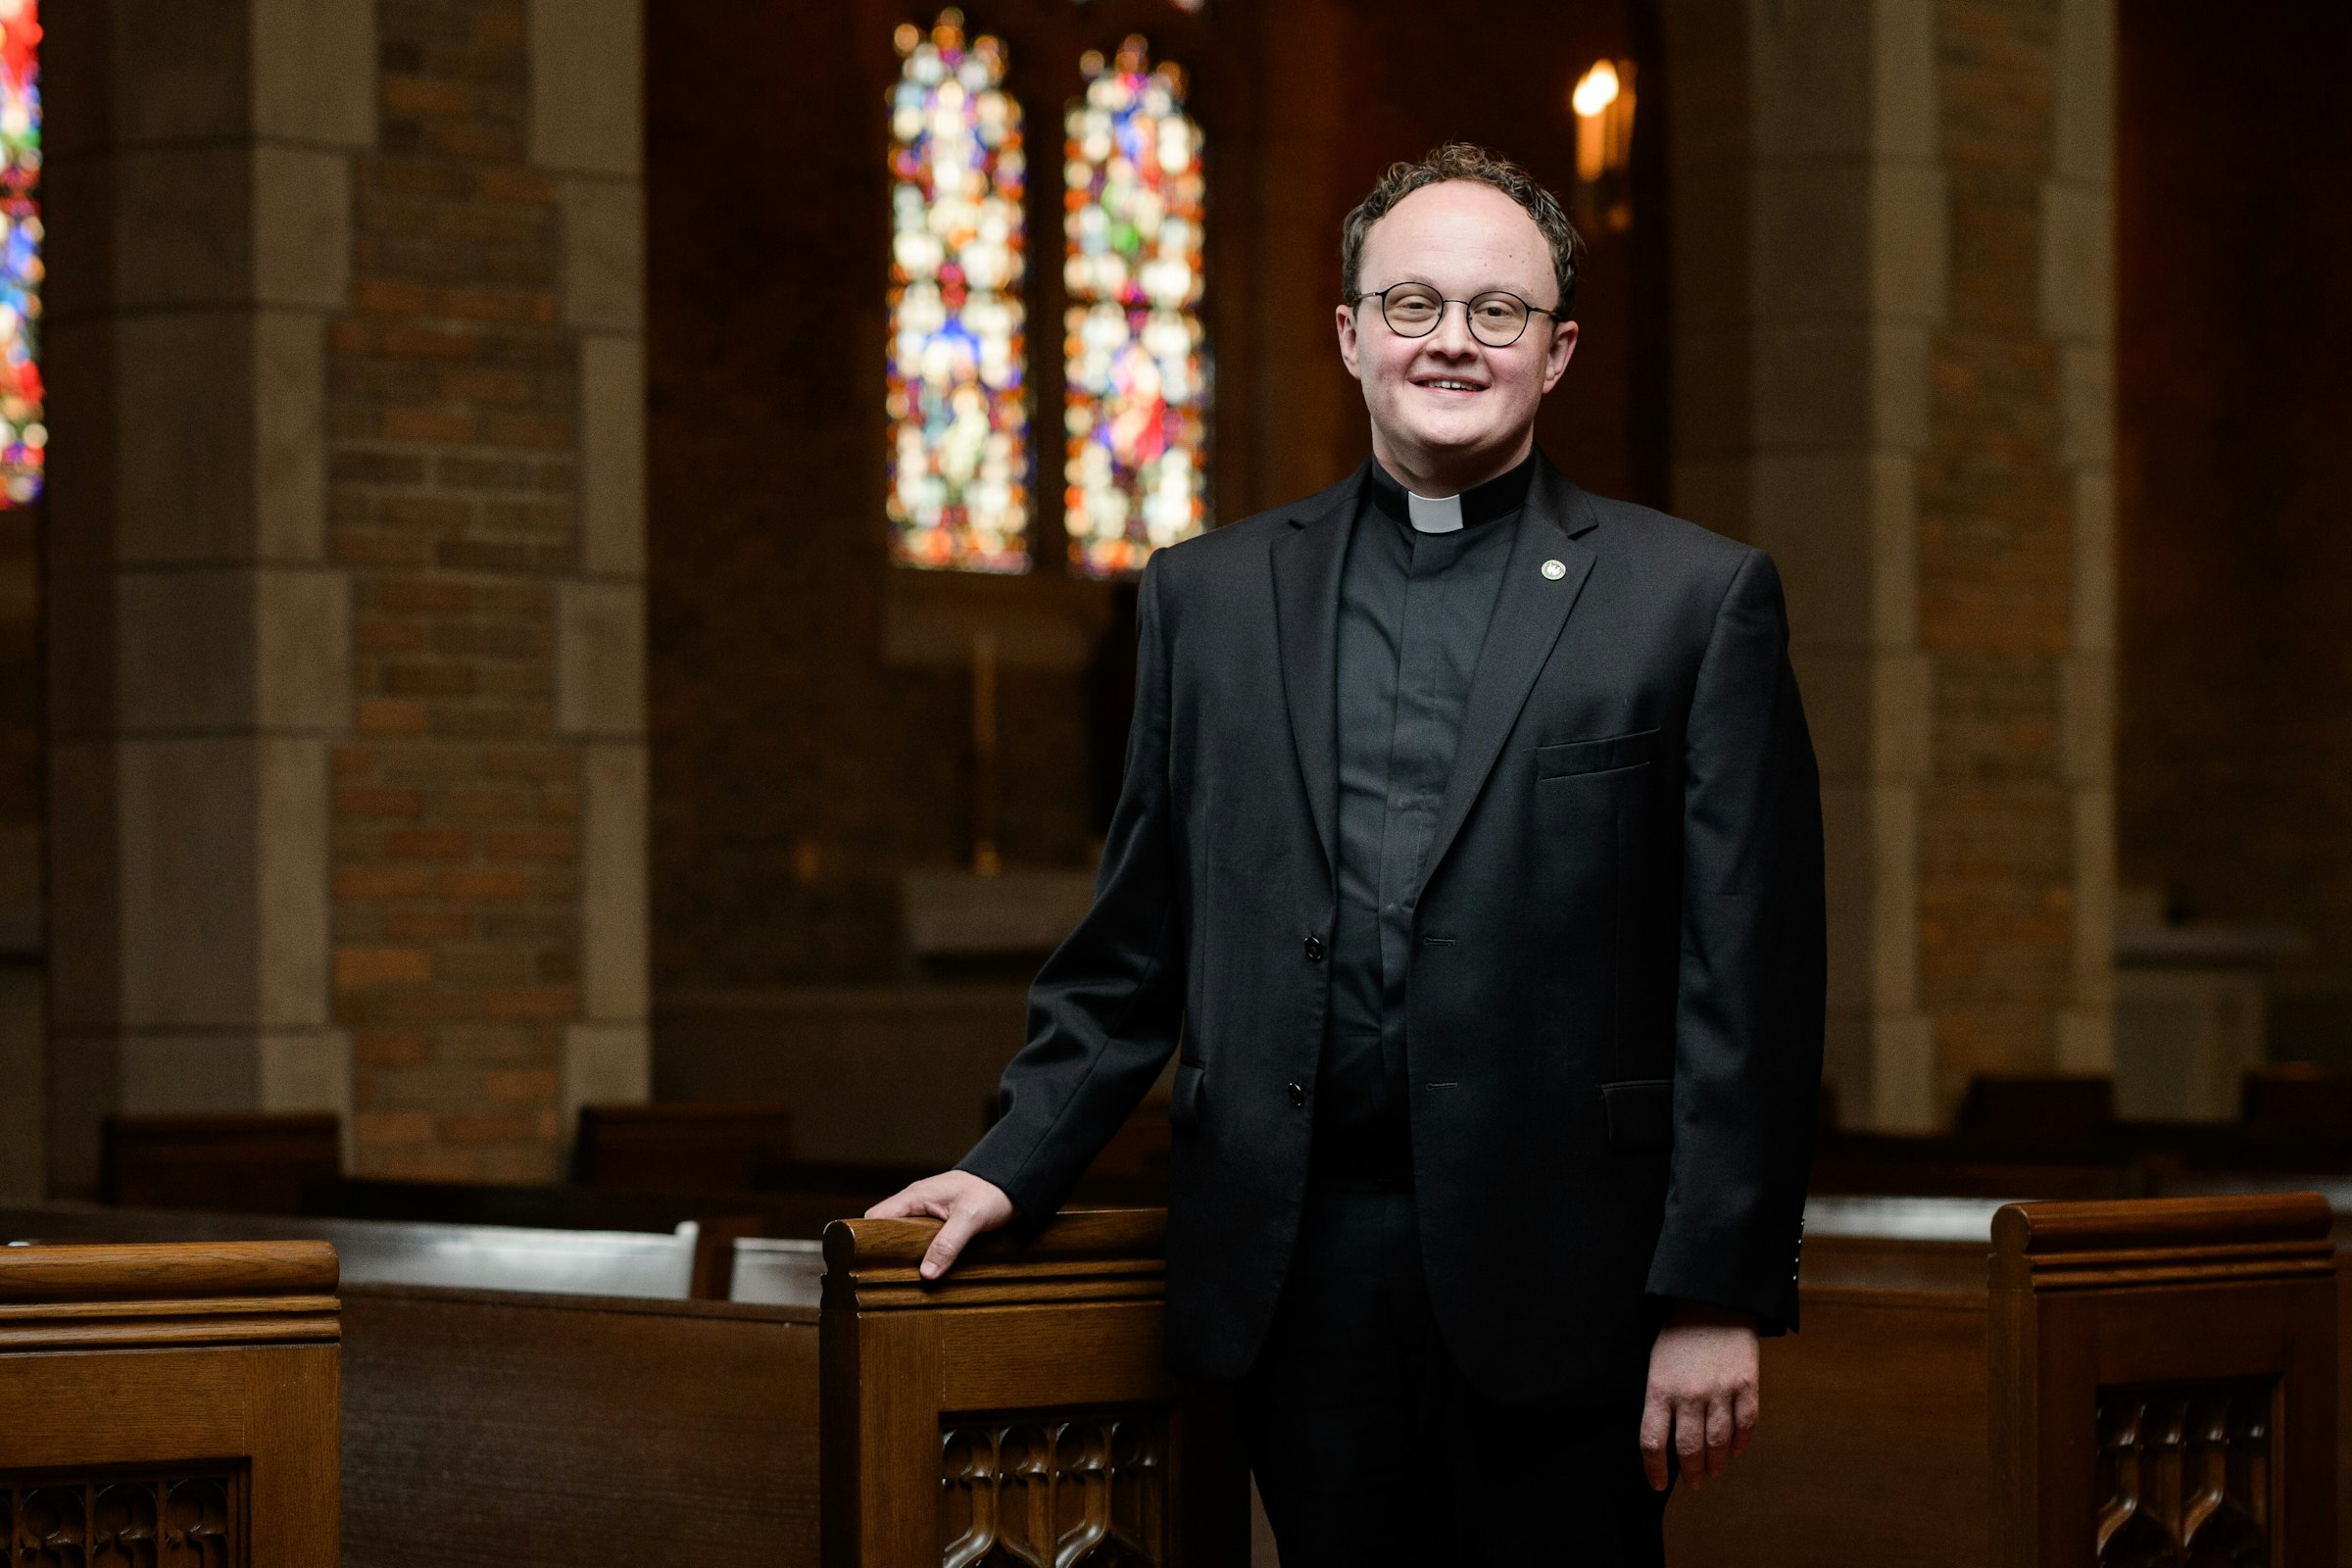 Five men will be ordained Detroit priests this Saturday Get to know